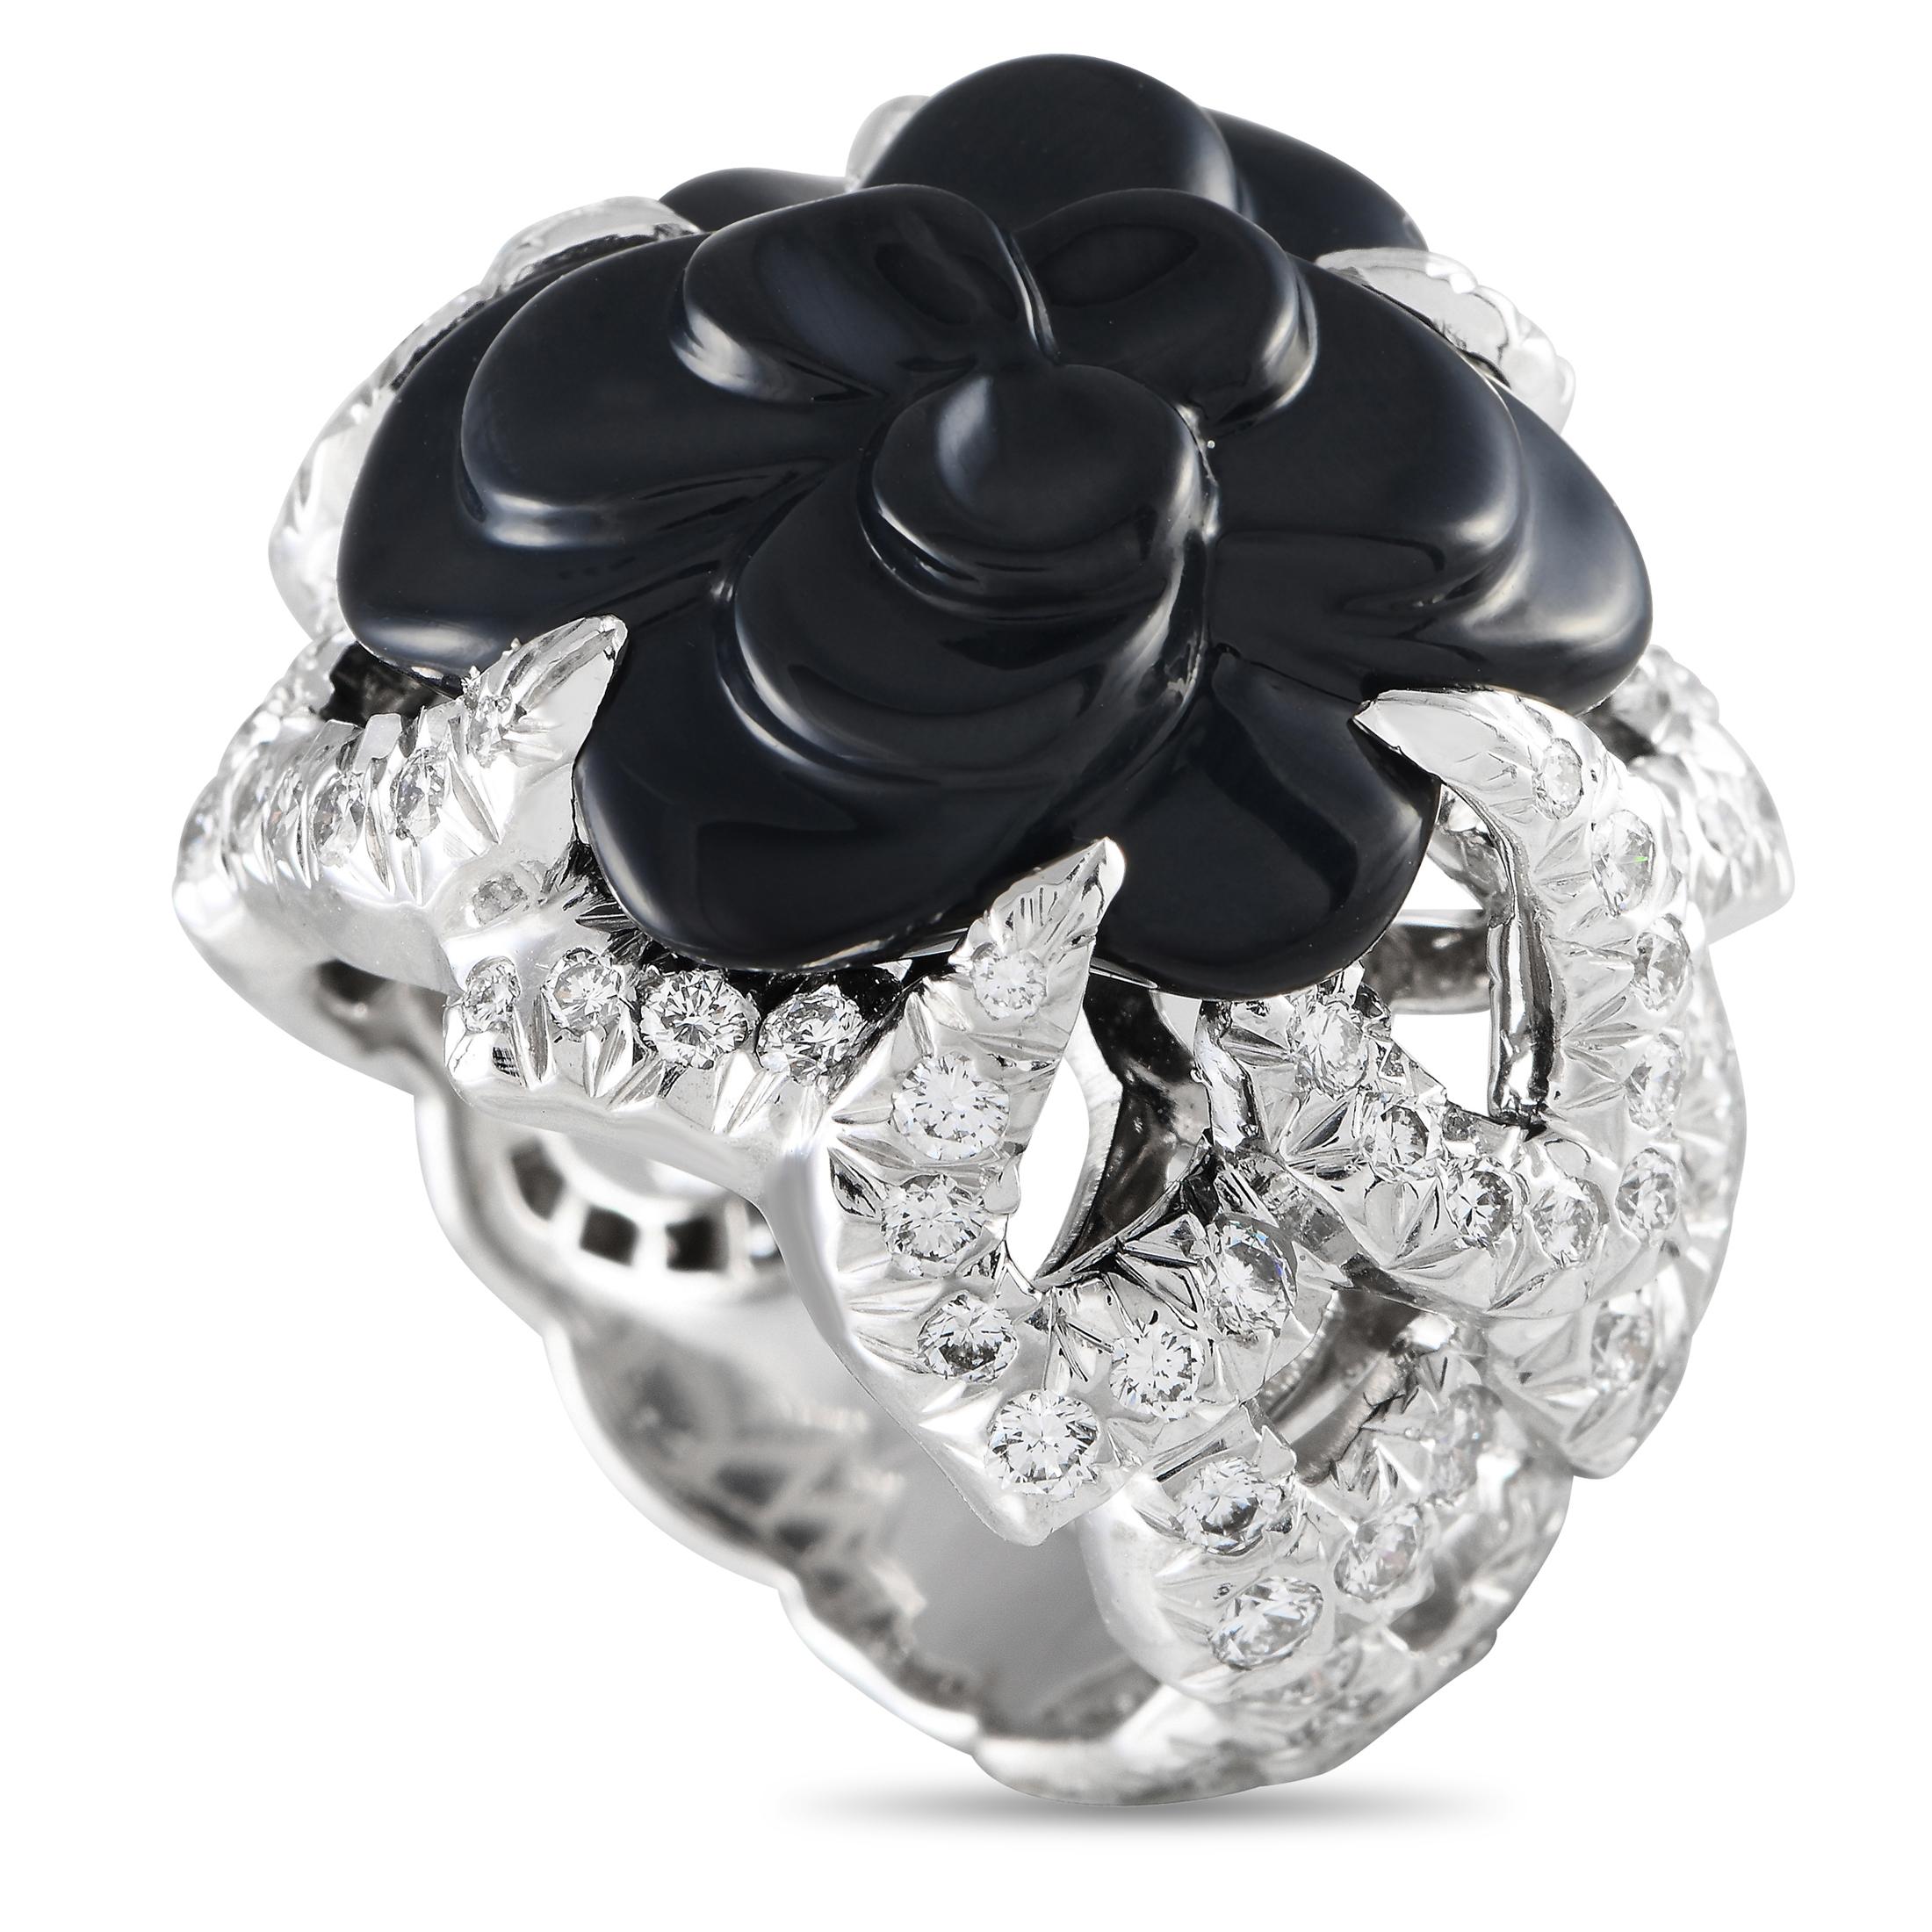 Chanel Camlia 18K White Gold 2.50ct Diamond and Onyx Cocktail Ring In Excellent Condition For Sale In Southampton, PA